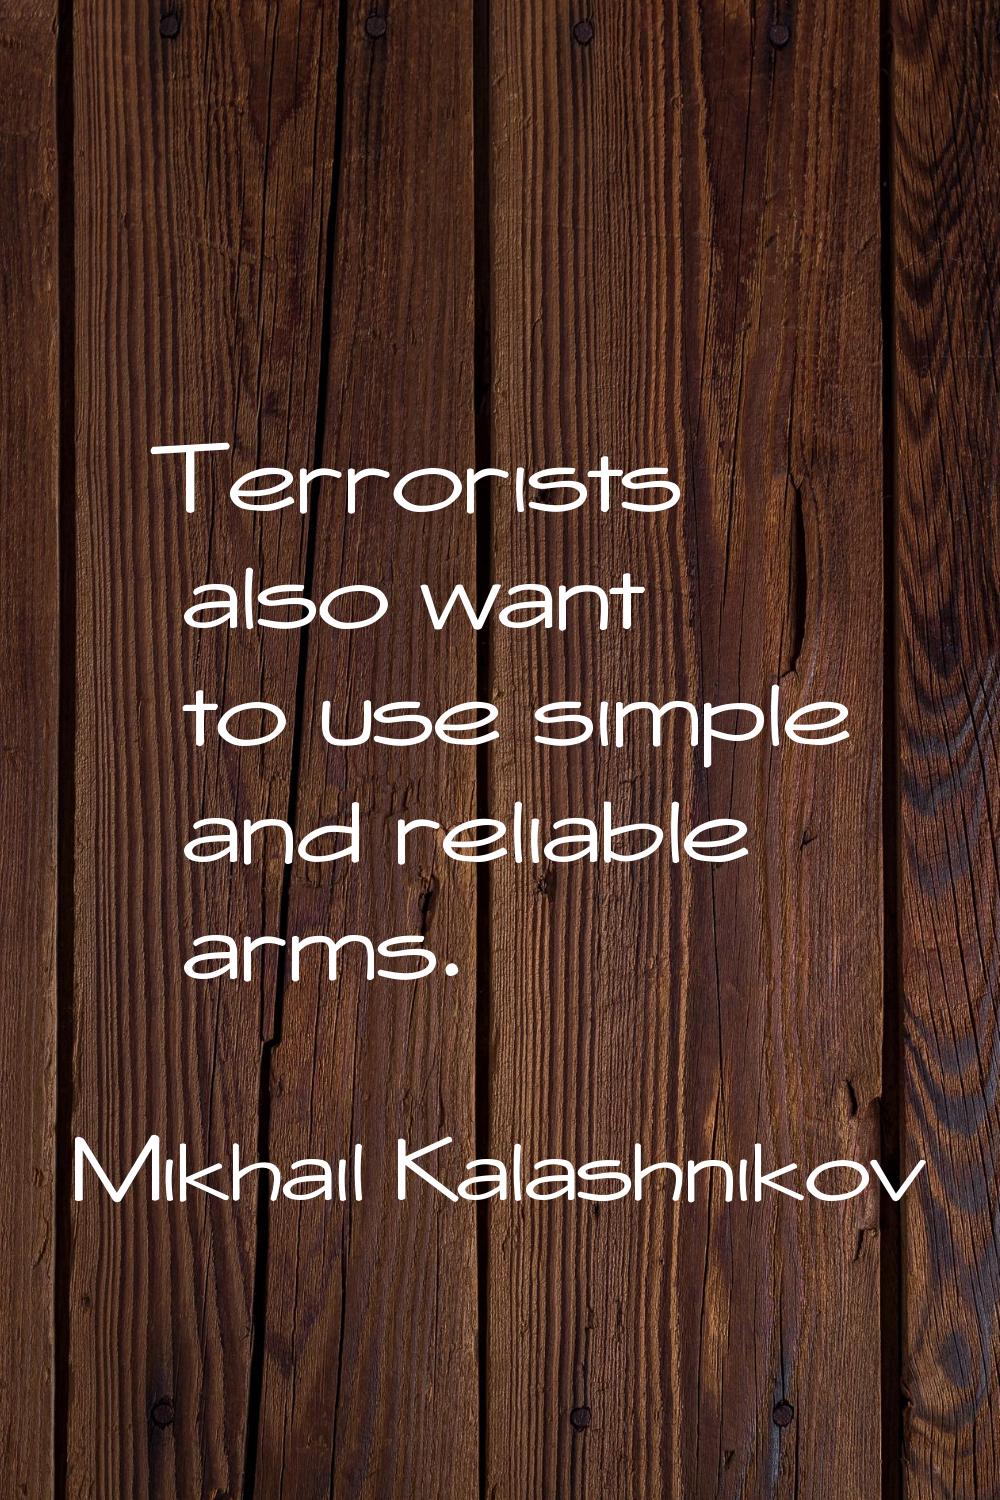 Terrorists also want to use simple and reliable arms.